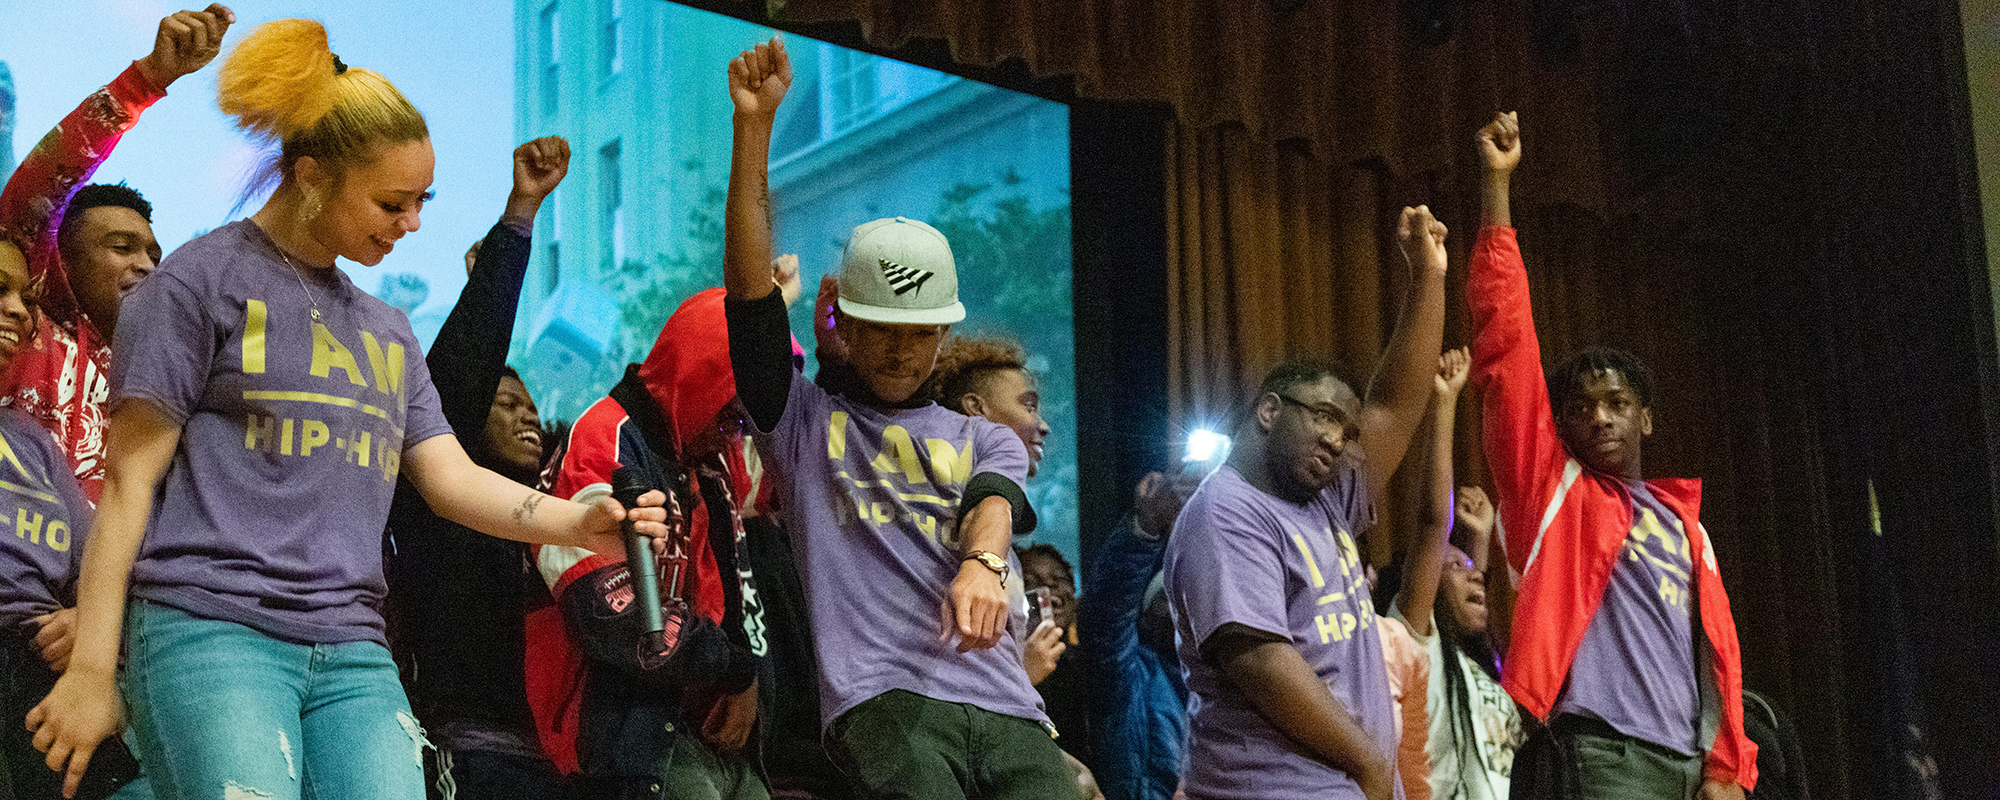 Students dancing in the finale of the hip hop literacy class final event